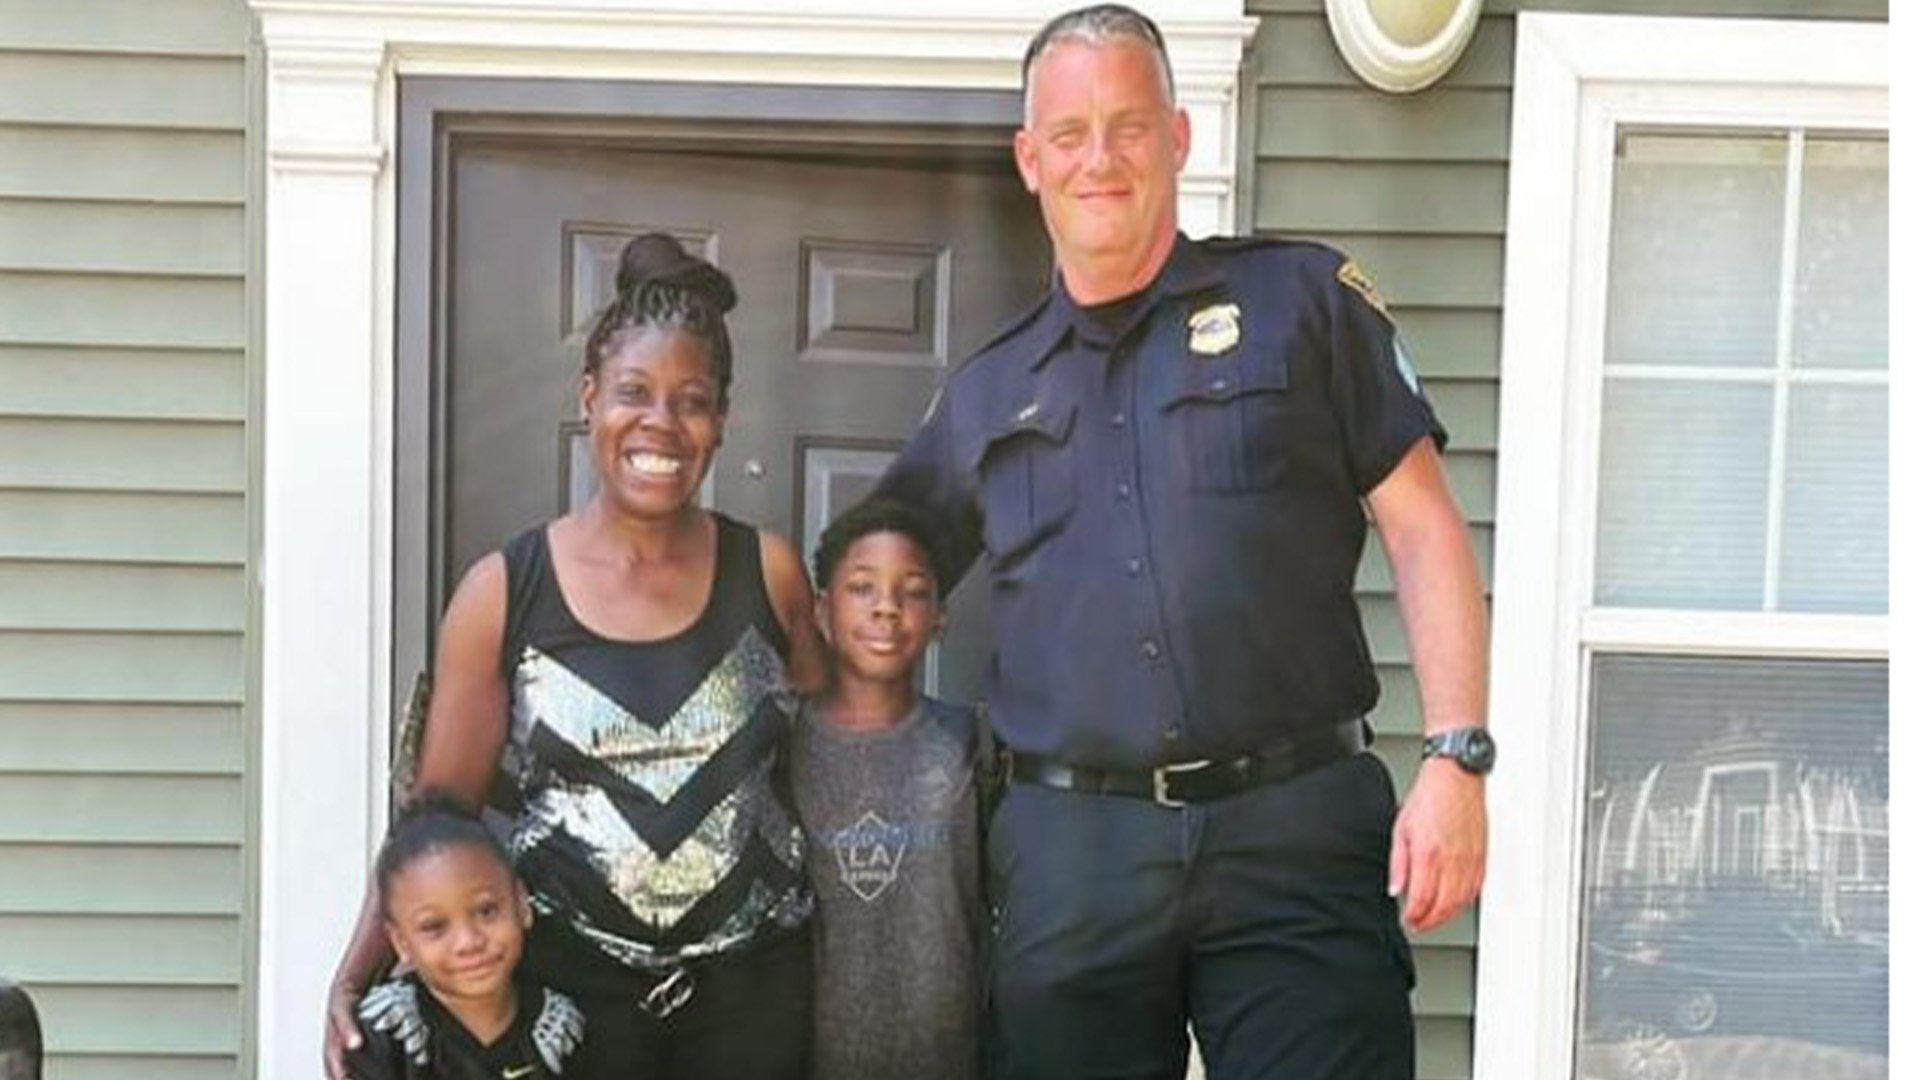 Cleveland Police Sgt. Raymond “Ray” O’Connor poses with Tomika Johnson and her family. The quick-thinking Johnson helped save the officer's life during a community celebration in the Ohio city on Aug. 20, 2022. Cleveland Police Department photo.